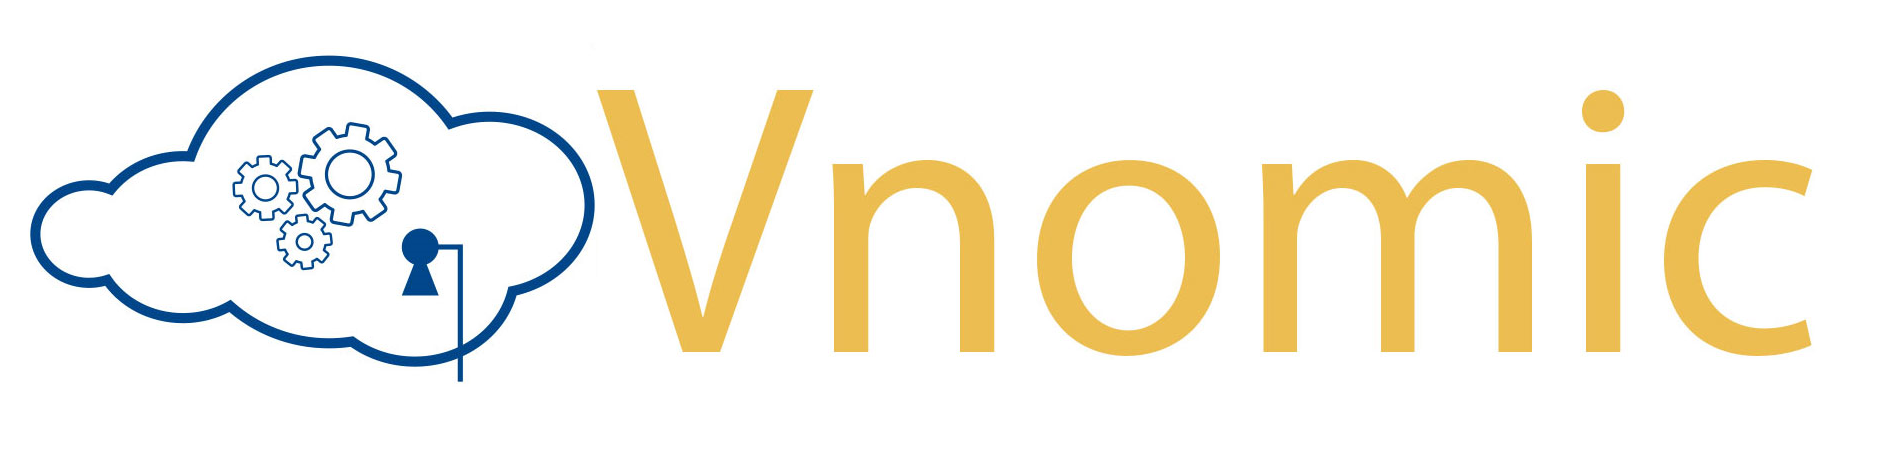 A yellow logo of the word " no ".